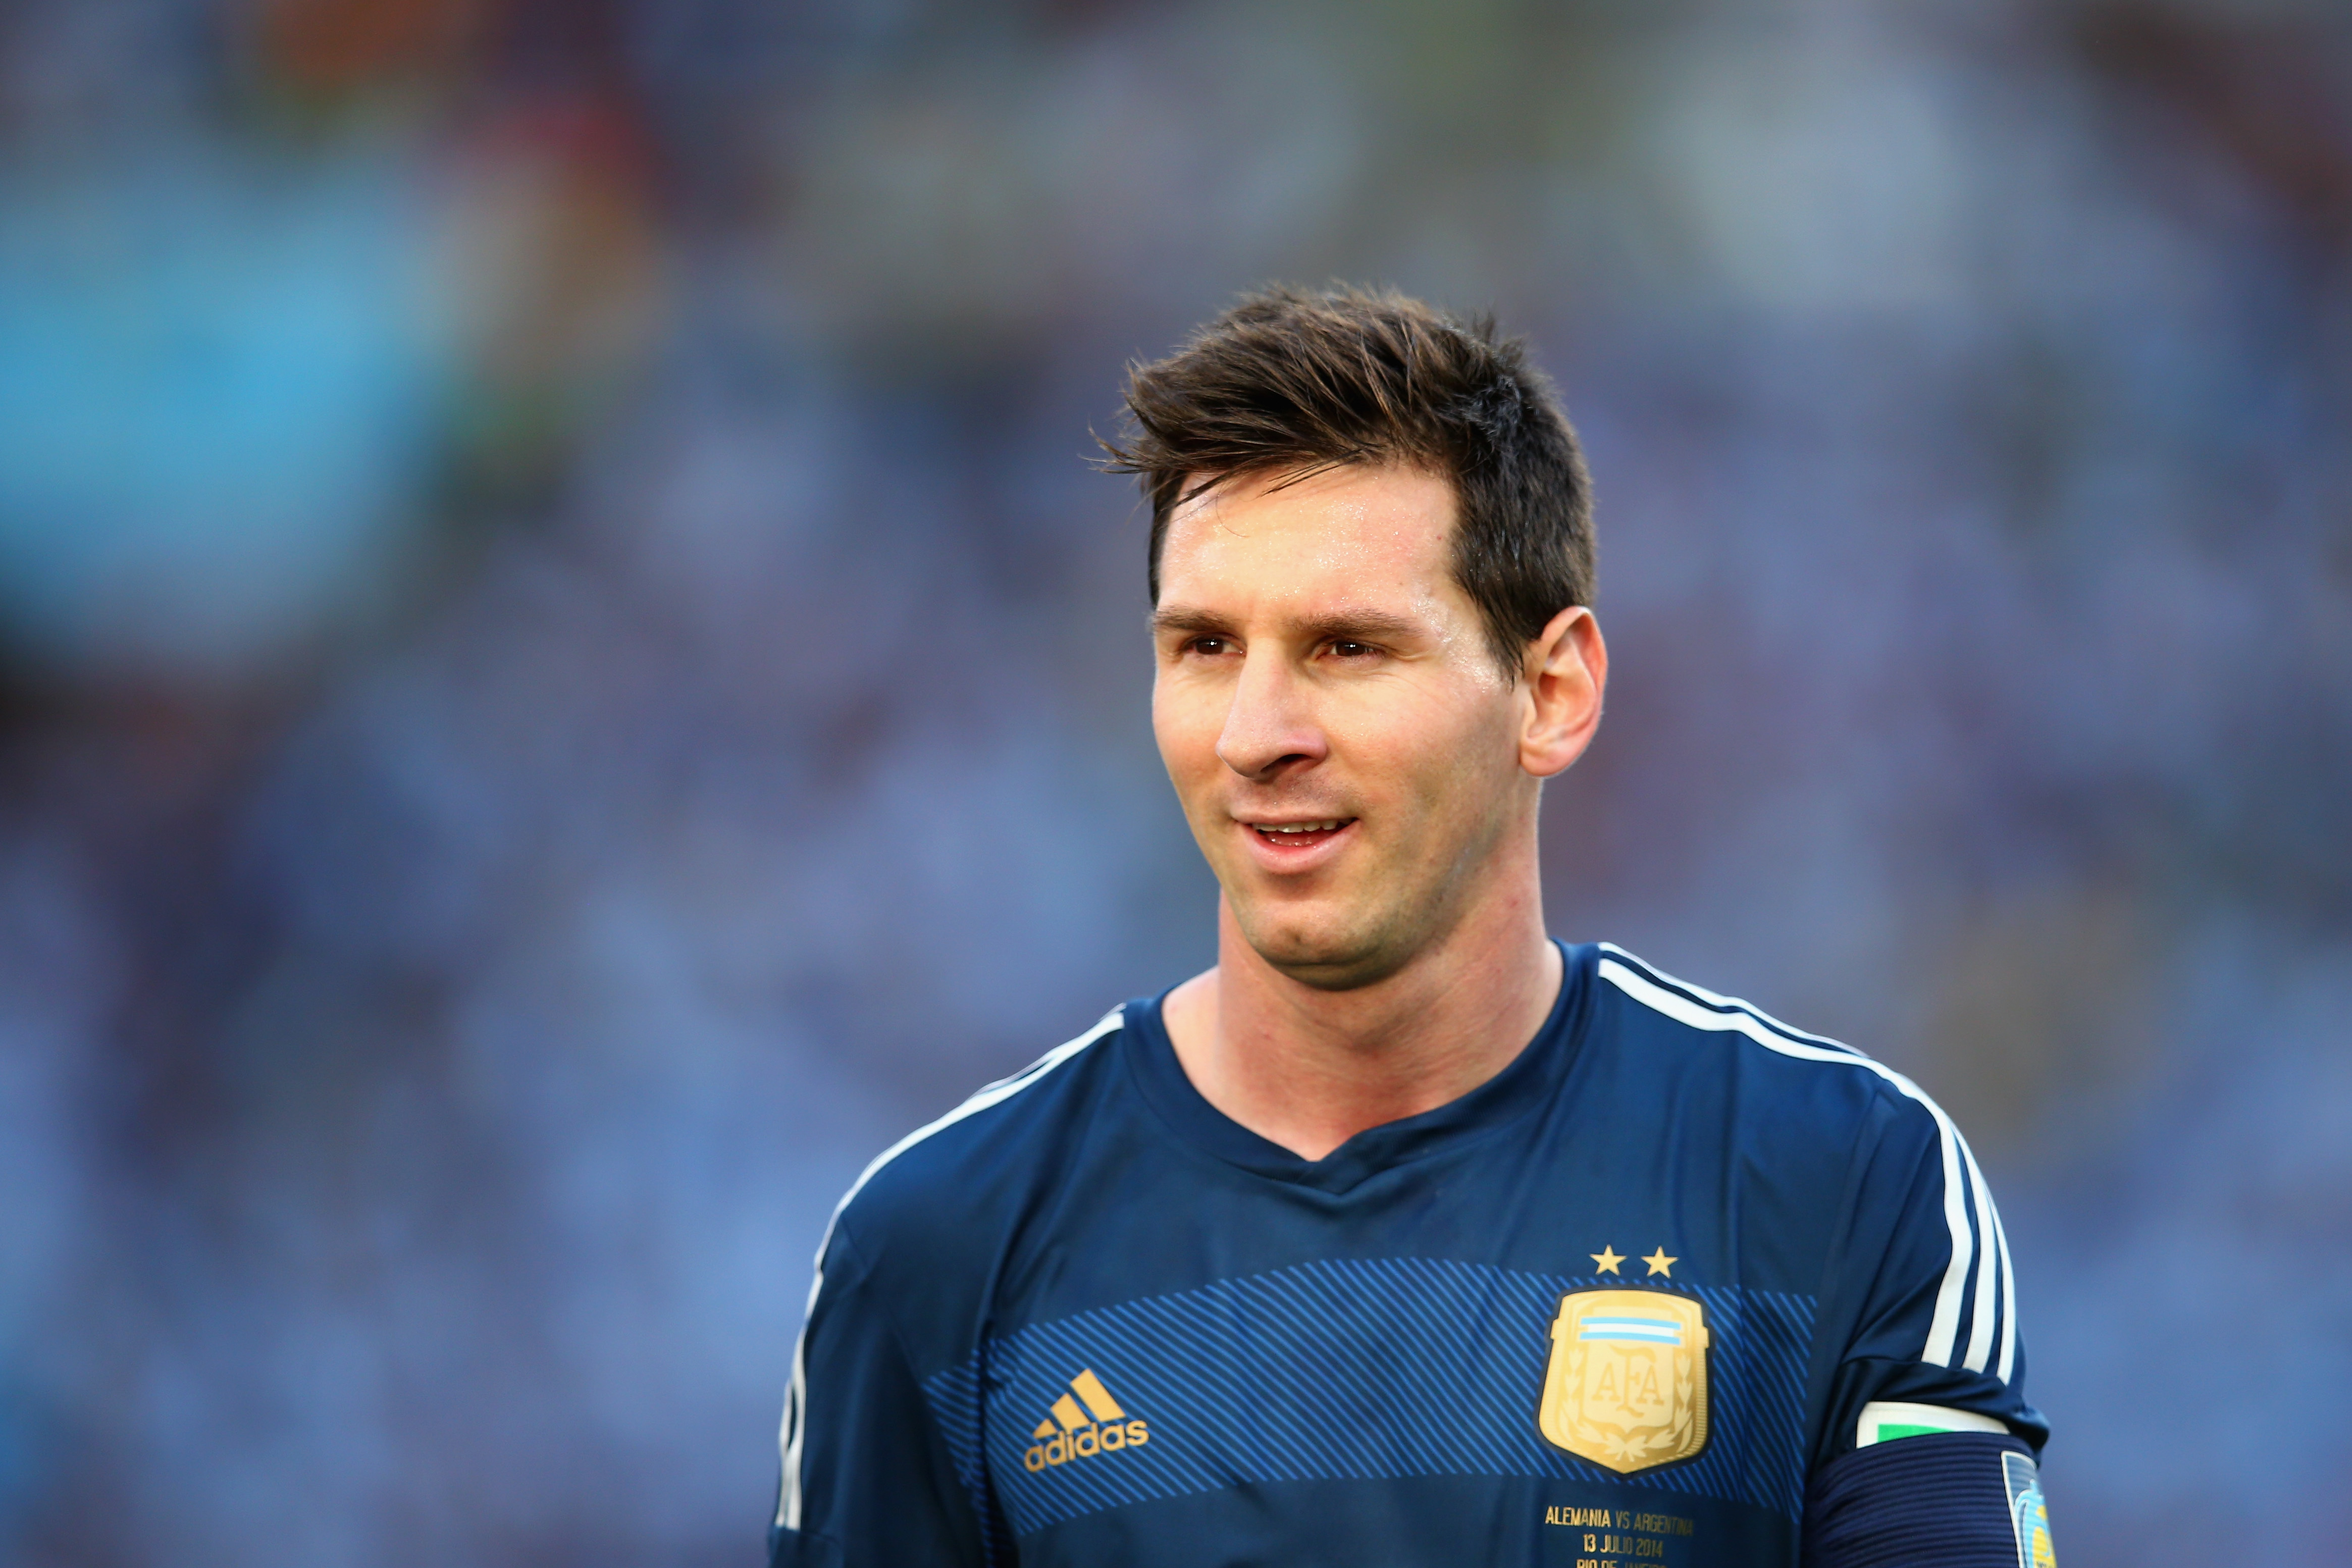 Lionel Messi Wallpapers Images Photos Pictures Backgrounds